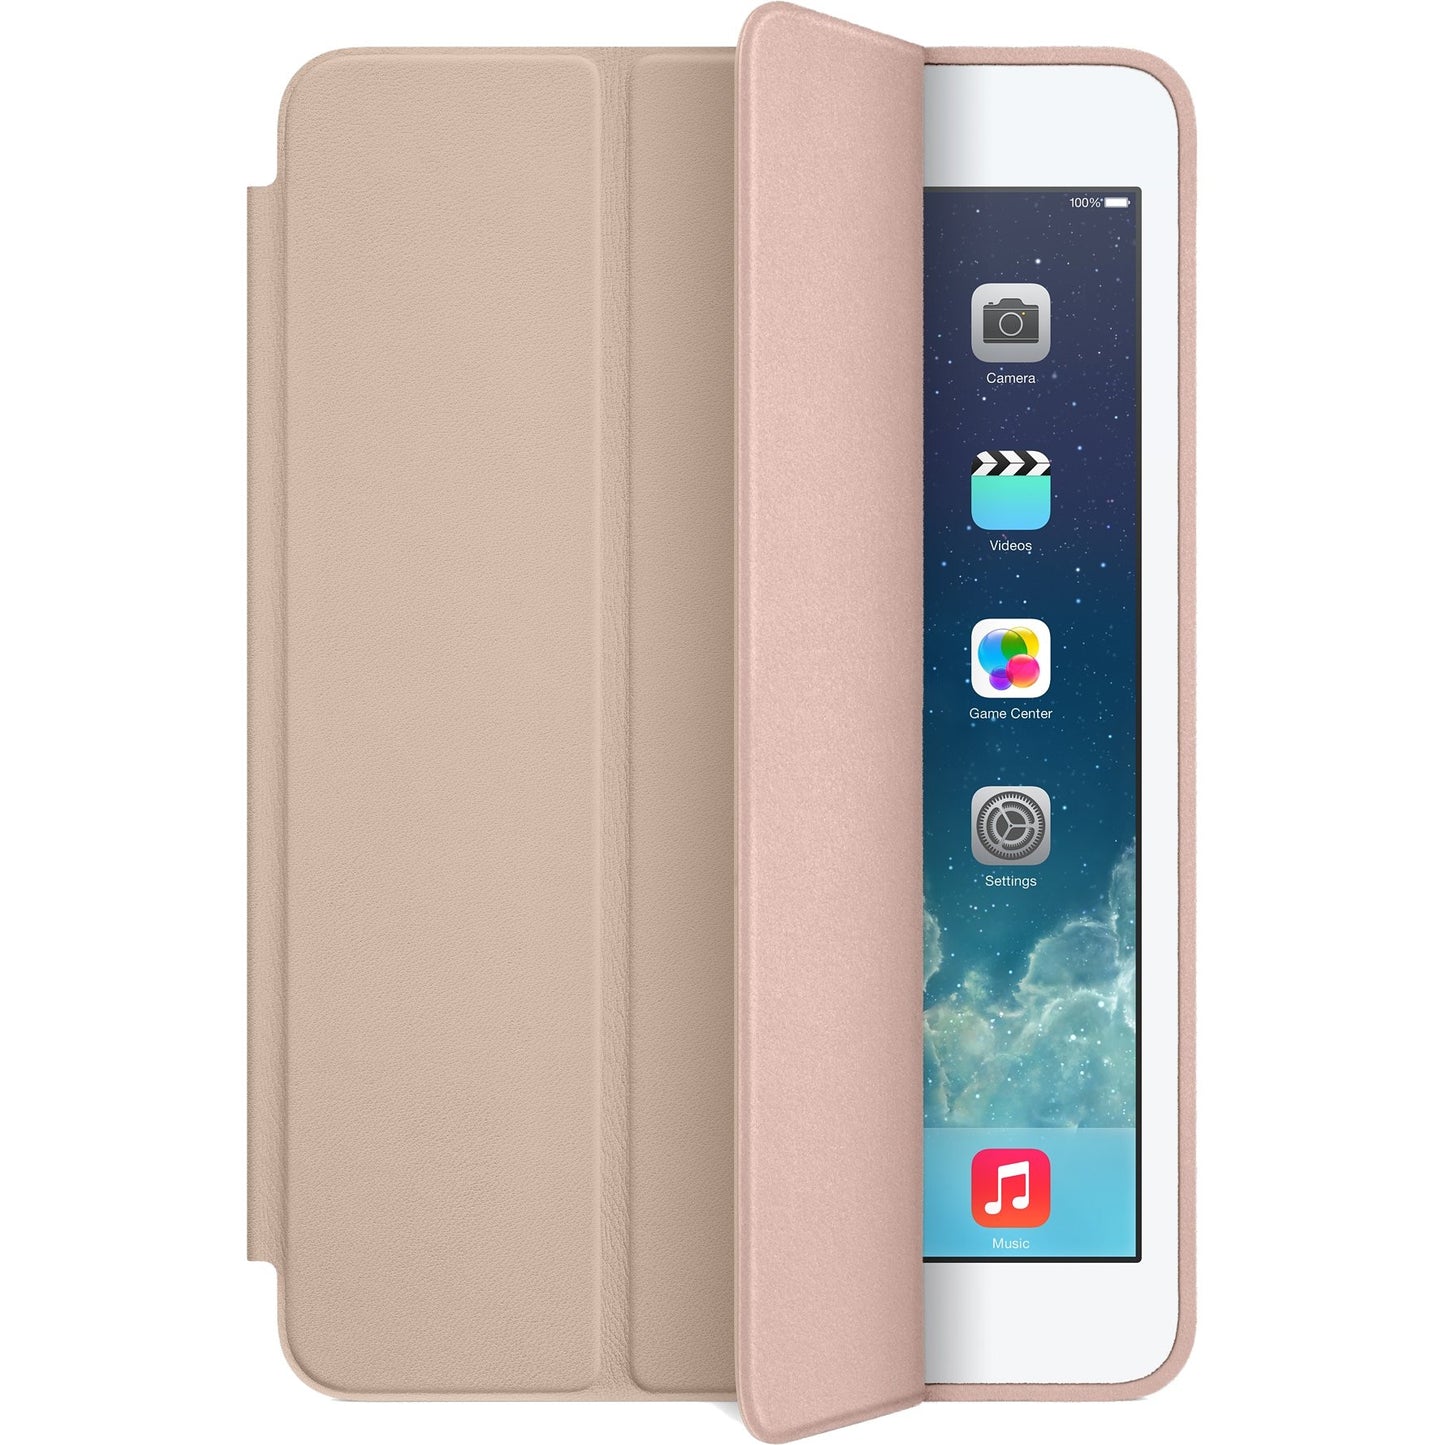 Apple Carrying Case for iPad mini - Beige